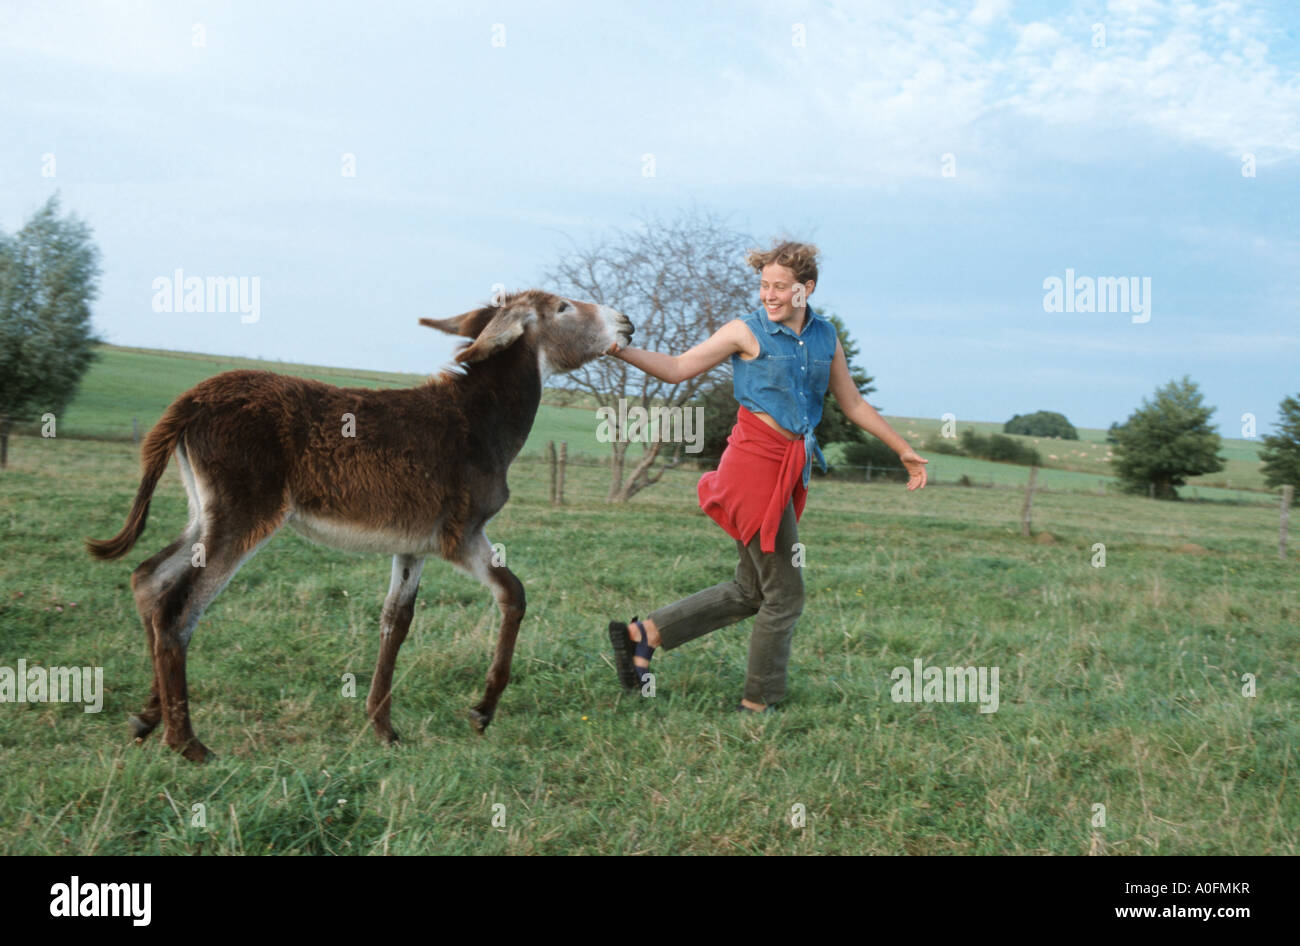 Poitou donkey (Equus asinus asinus), foal with girl running over meadow, France, Alsace Stock Photo